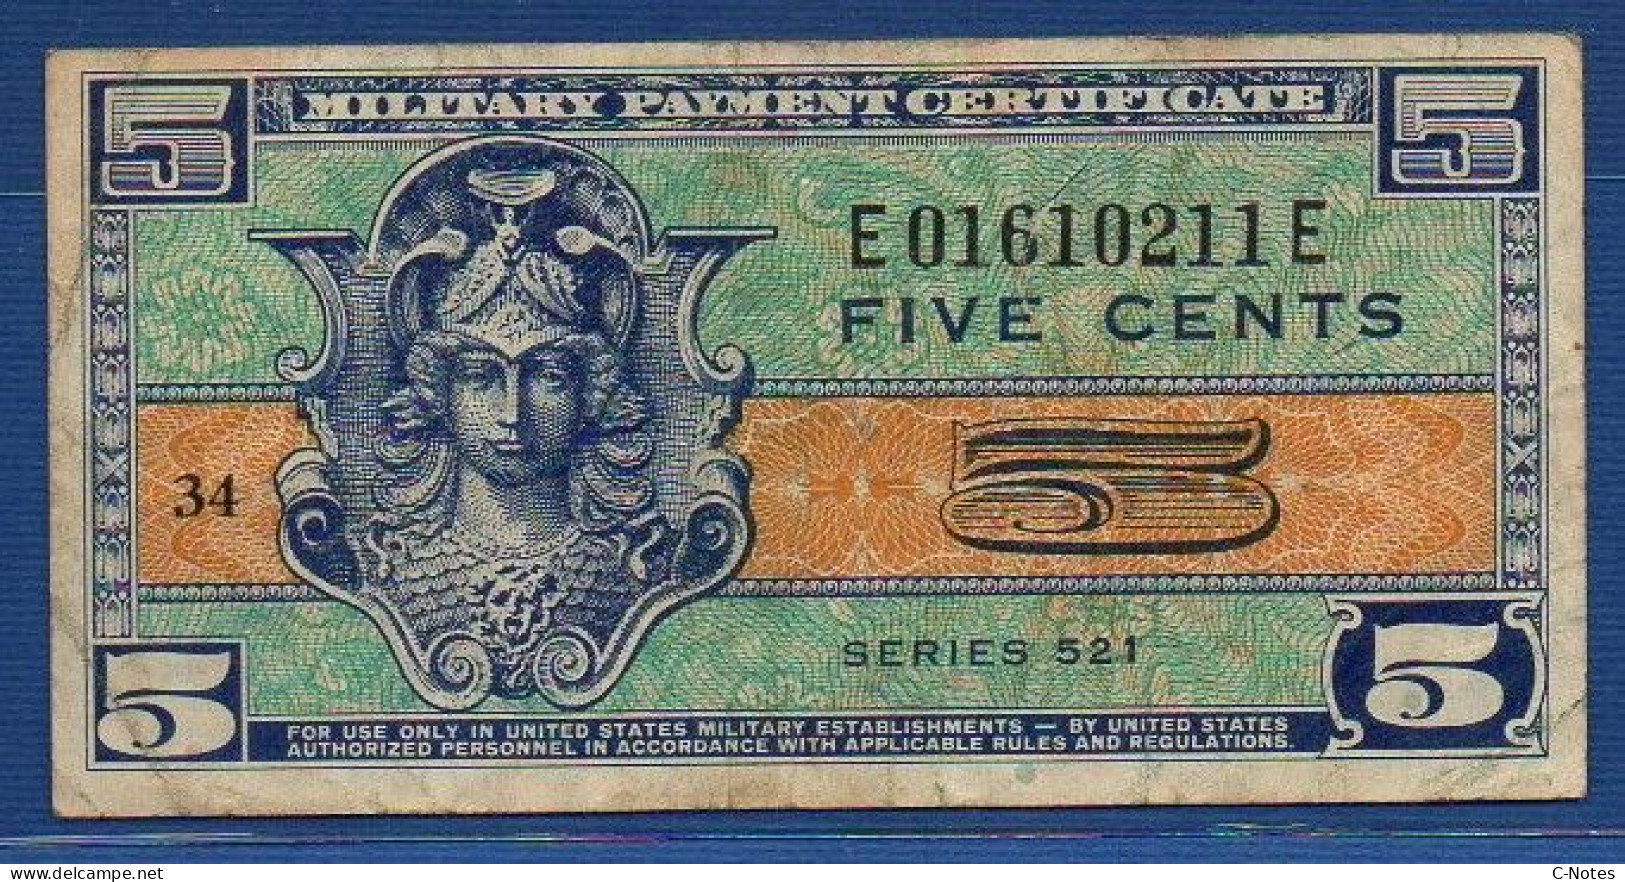 UNITED STATES OF AMERICA - P.M29 – 5 Cents 1954 Circulated, S/n E01610211E - 1954-1958 - Series 521